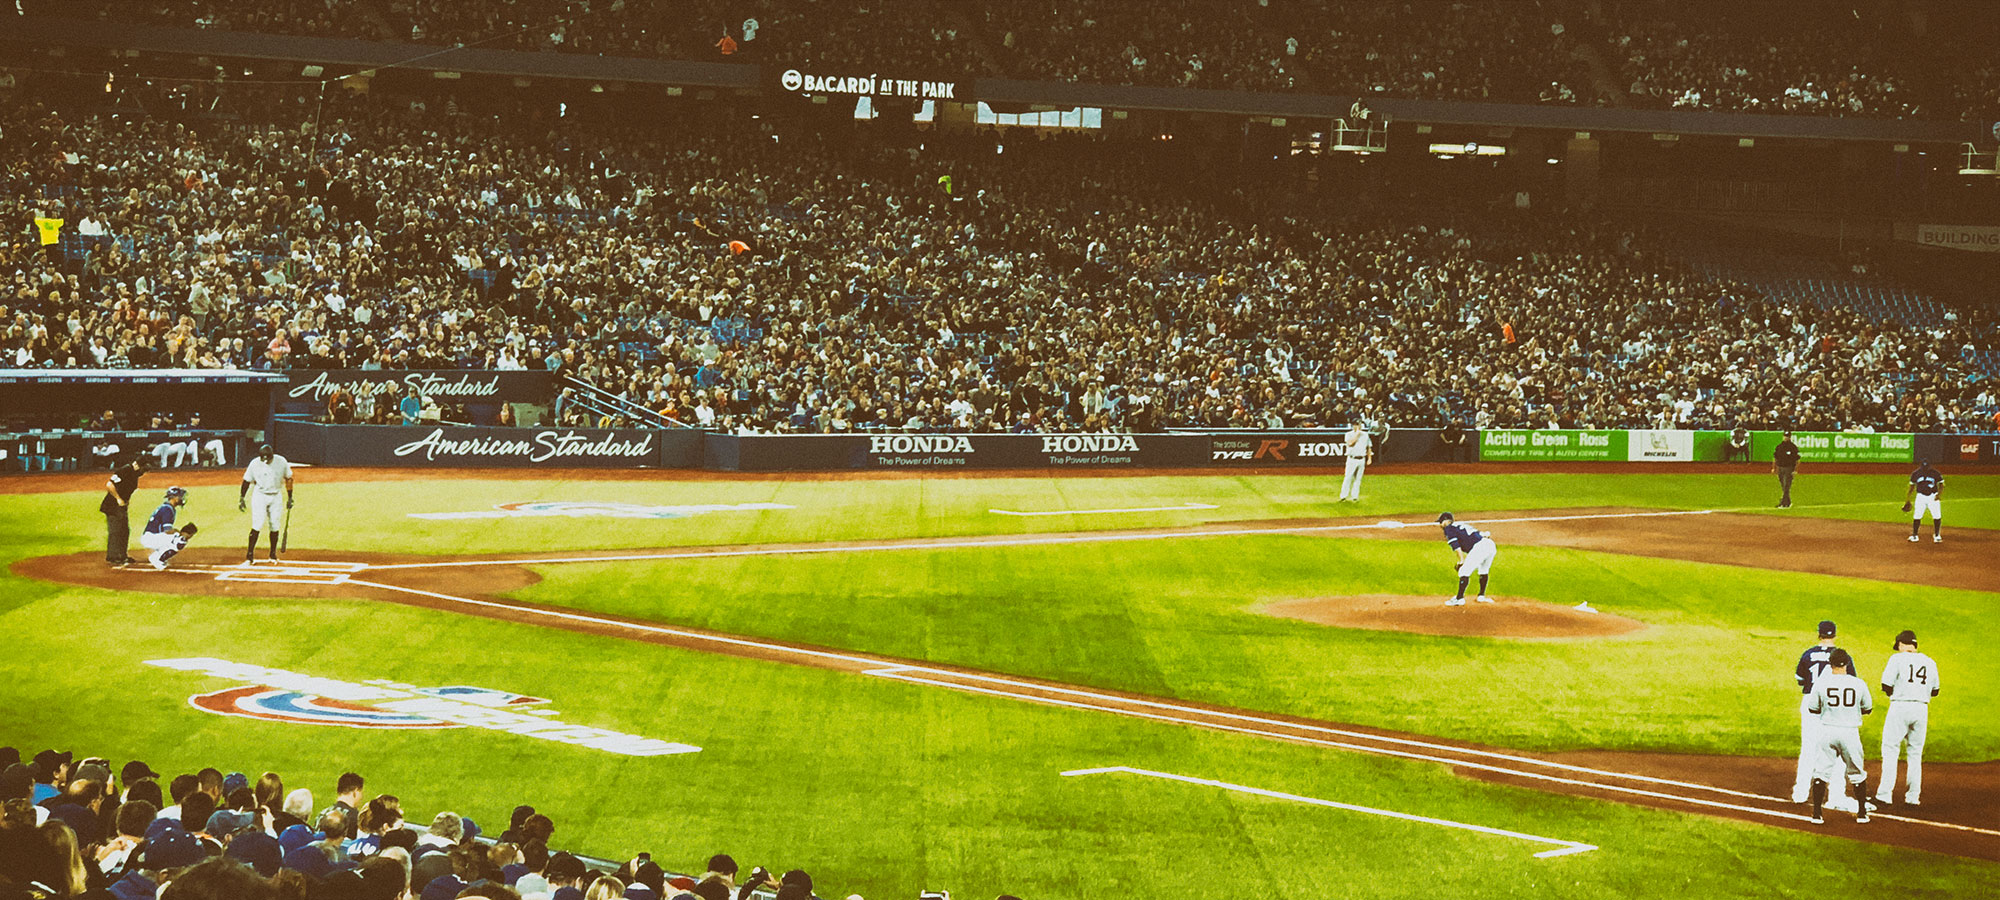 New York Yankees at Toronto Blue Jays, March 31st, 2018